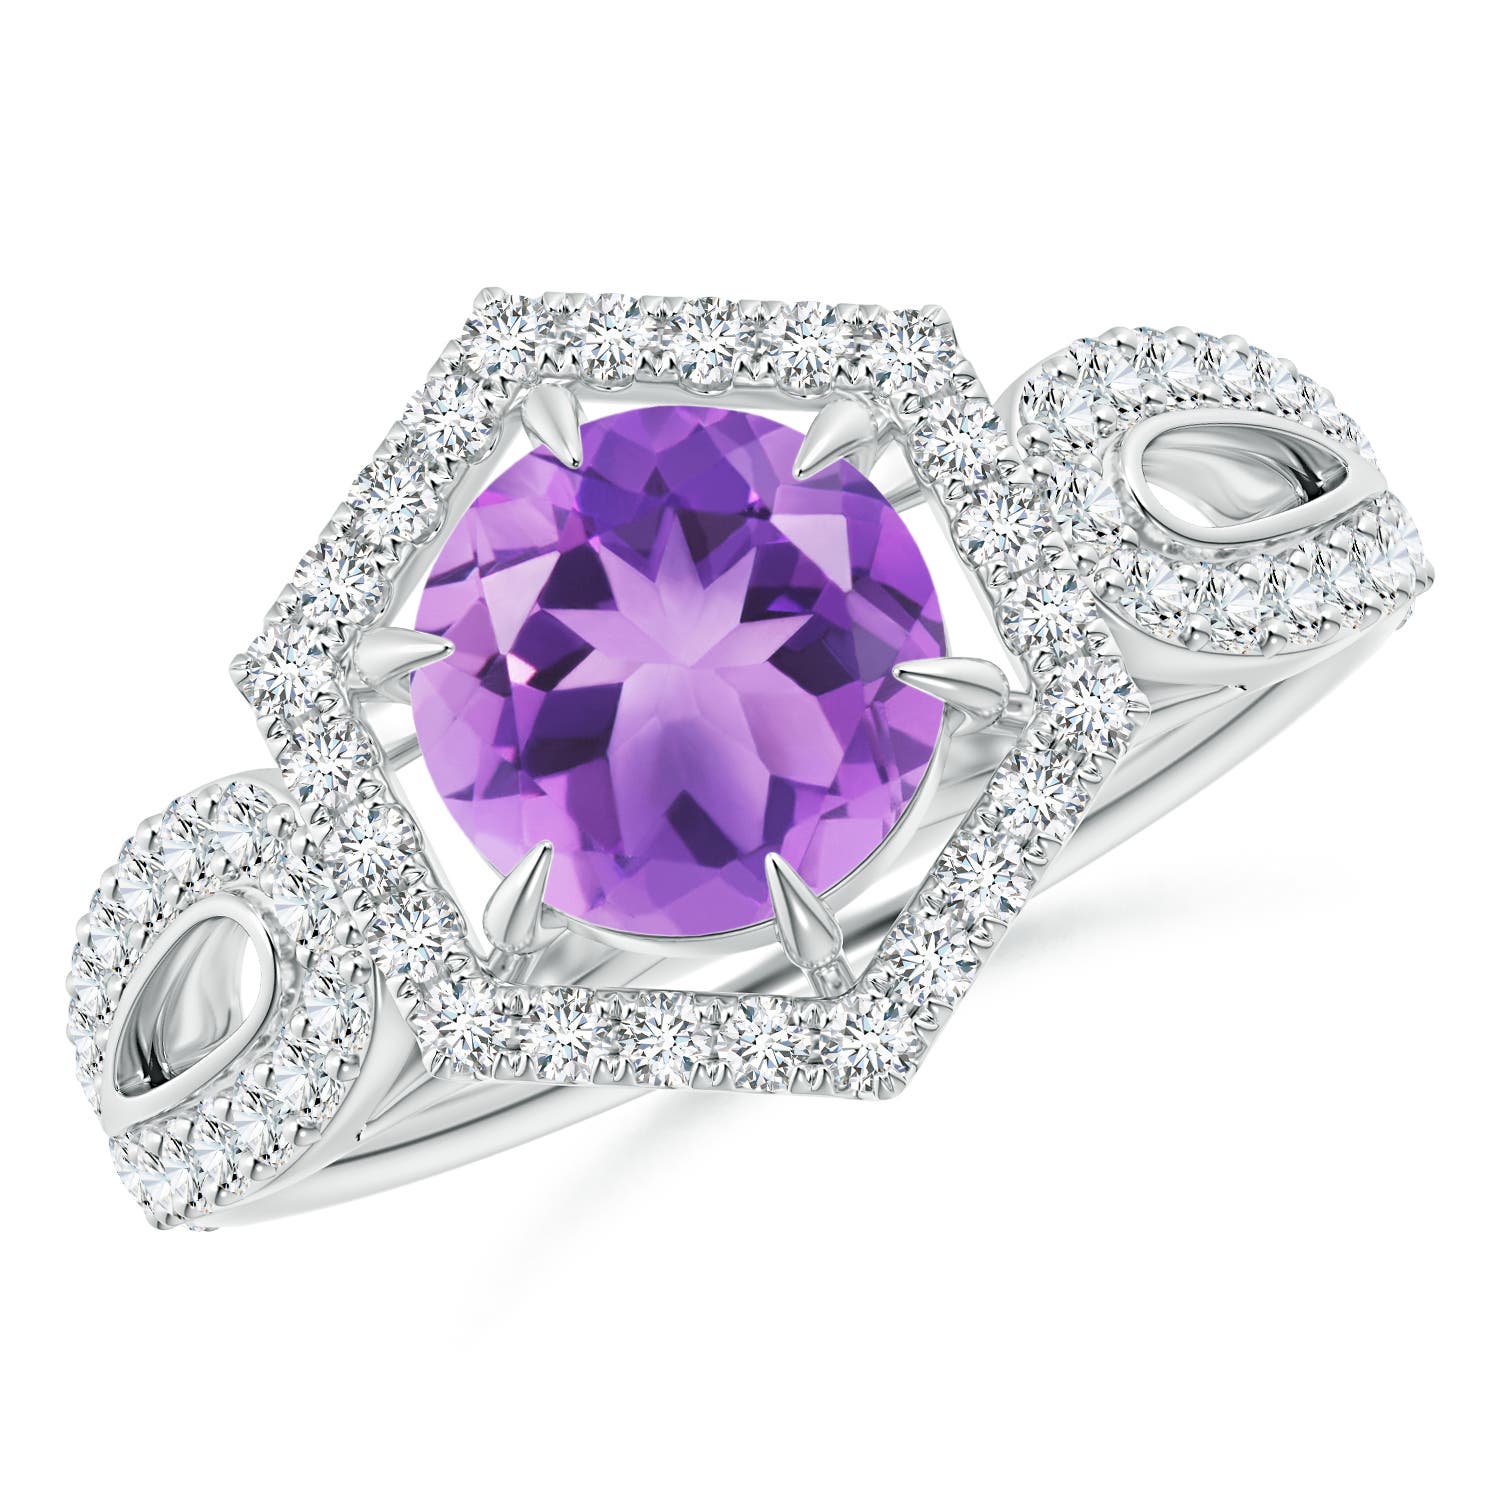 A - Amethyst / 1.75 CT / 14 KT White Gold